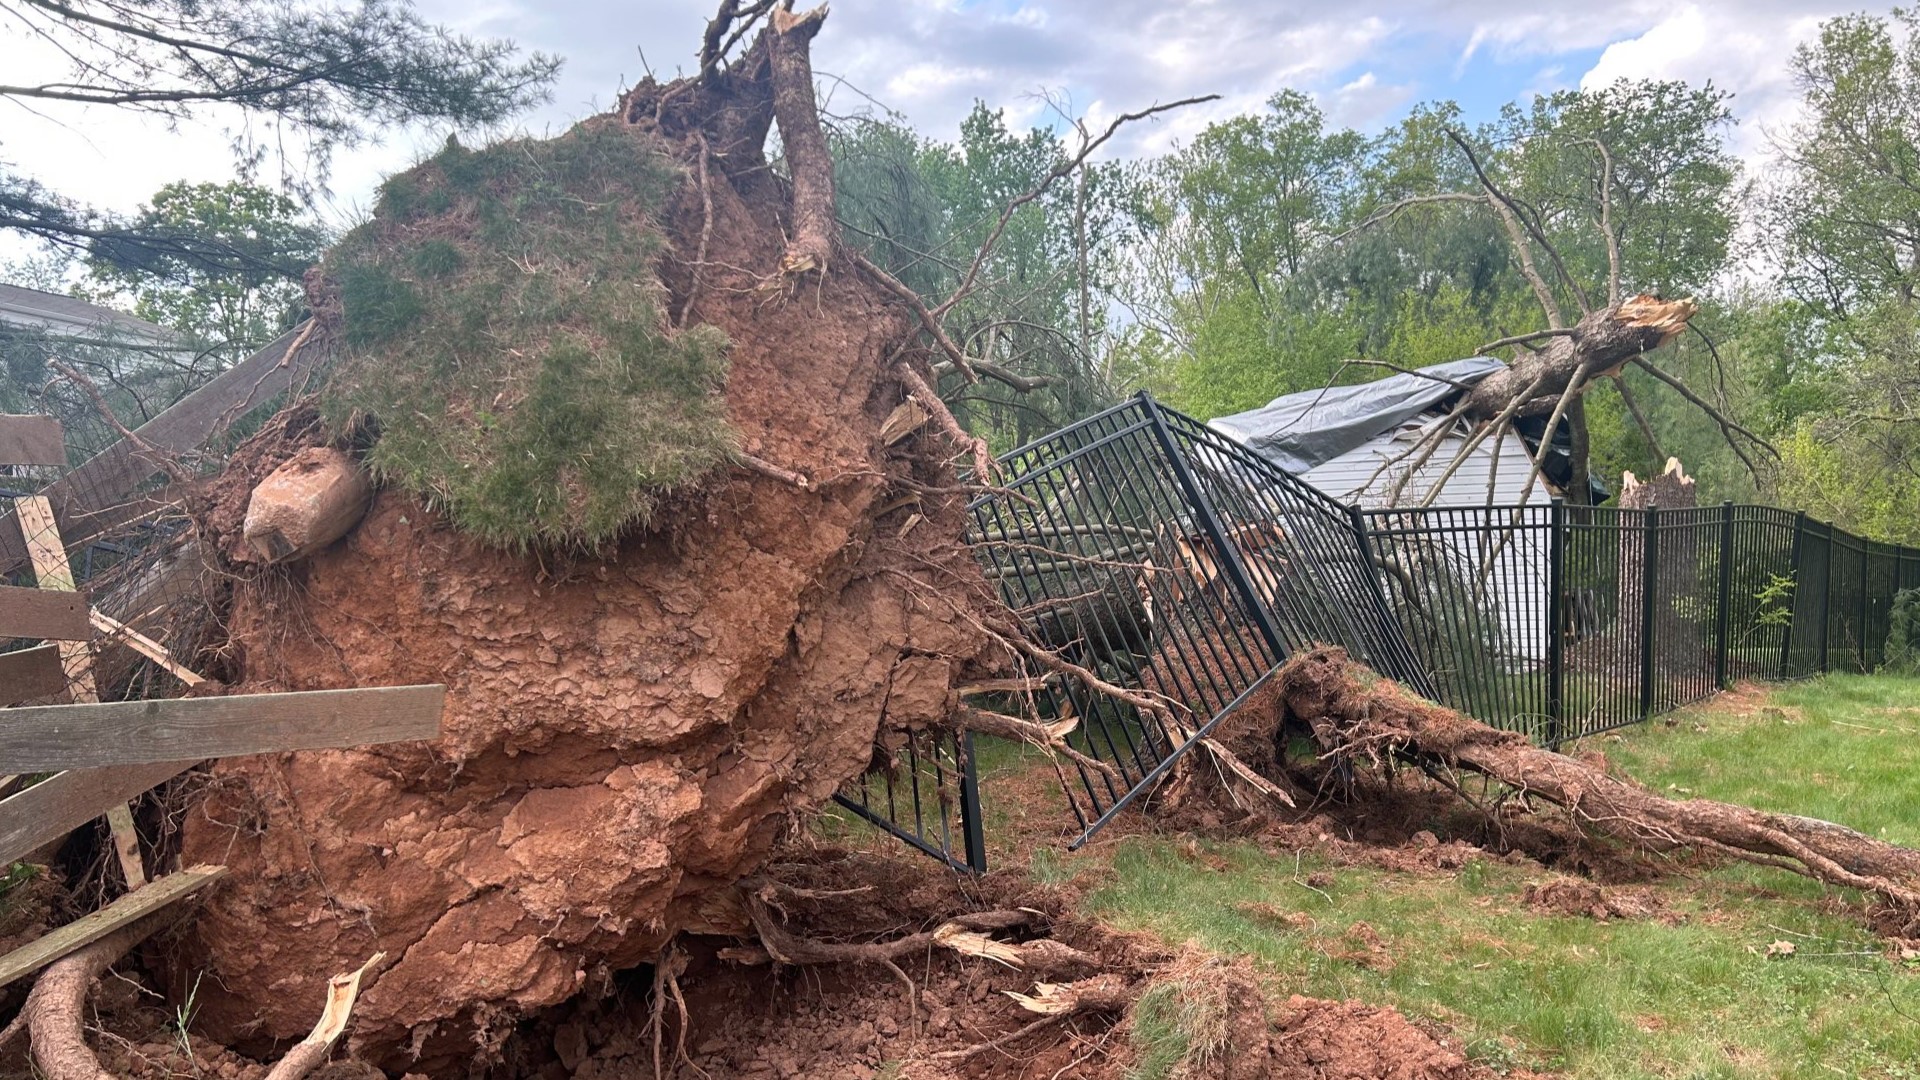 The NWS Baltimore/Washington said an EF-0 tornado tracked through Dowden Circle near Stevens Park with estimated peak winds at 75 miles per hour.